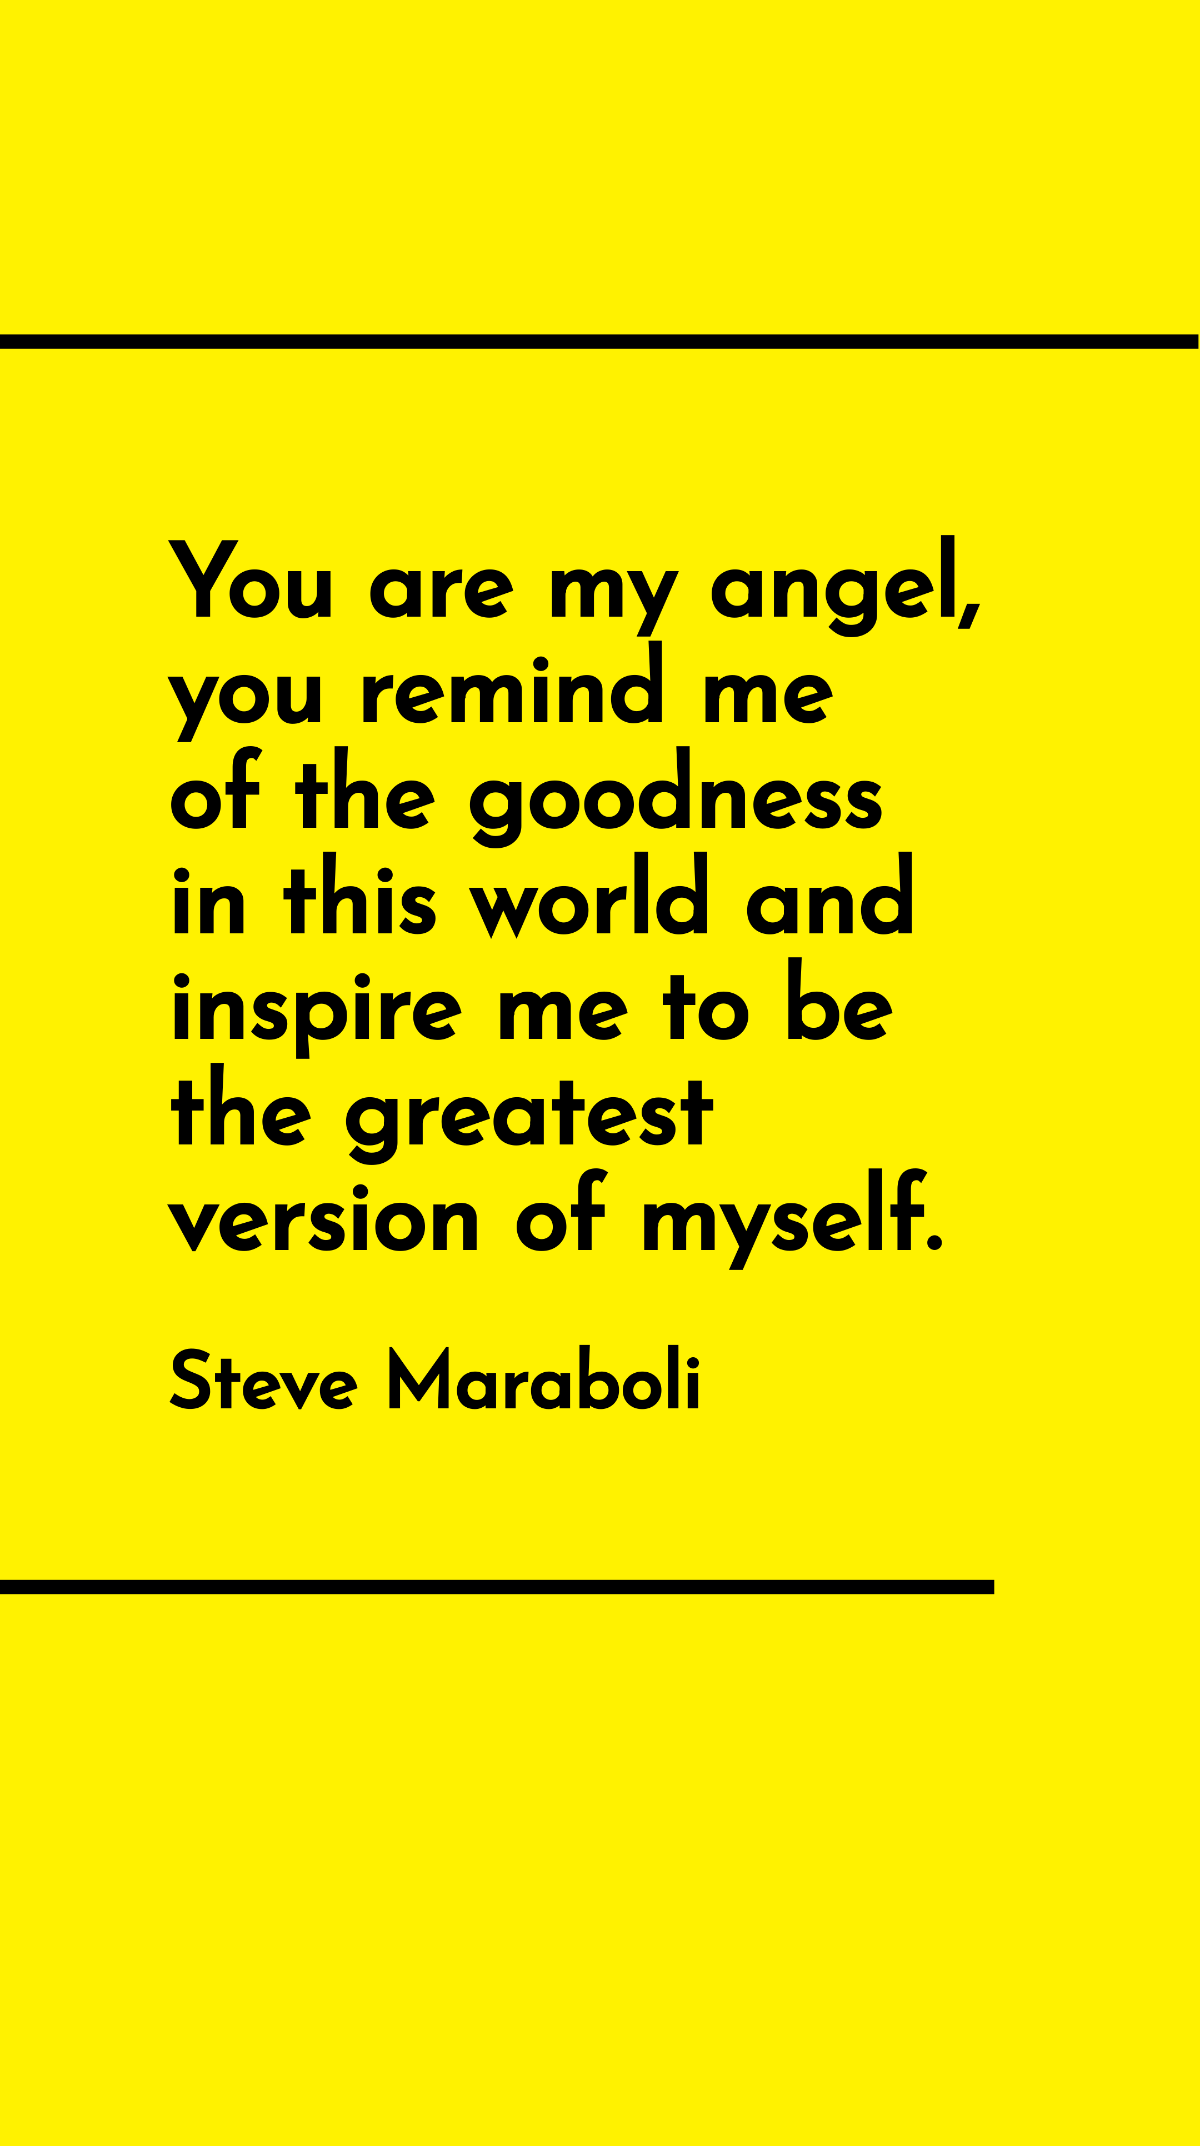 Free Steve Maraboli - You are my angel, you remind me of the goodness in this world and inspire me to be the greatest version of myself Template